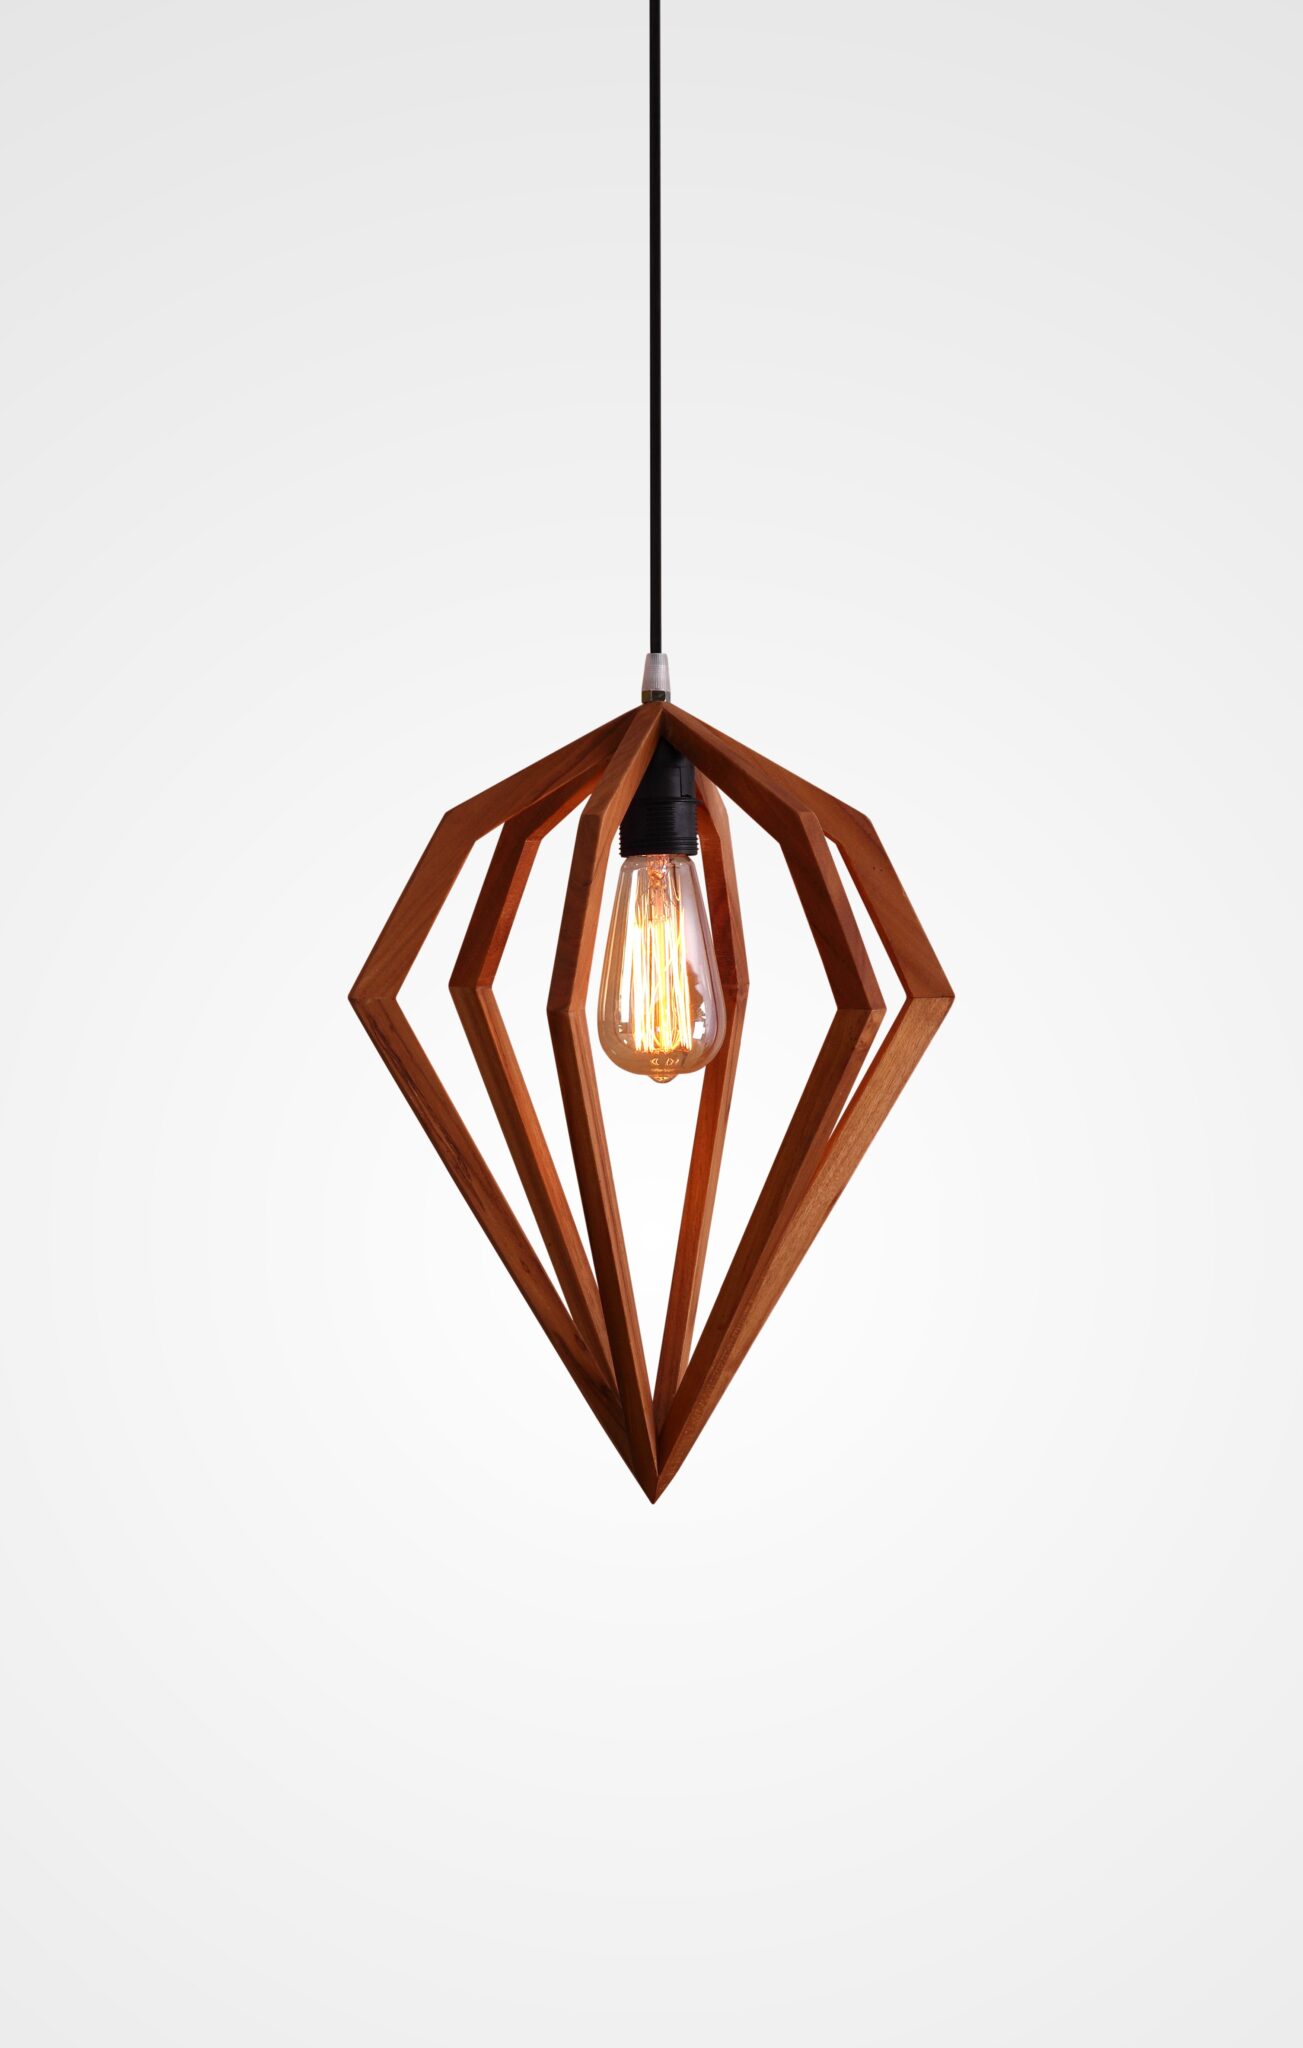 Upgrade Your Home Decor with UrViolet Solutions Minimalistic LED Pendant Light